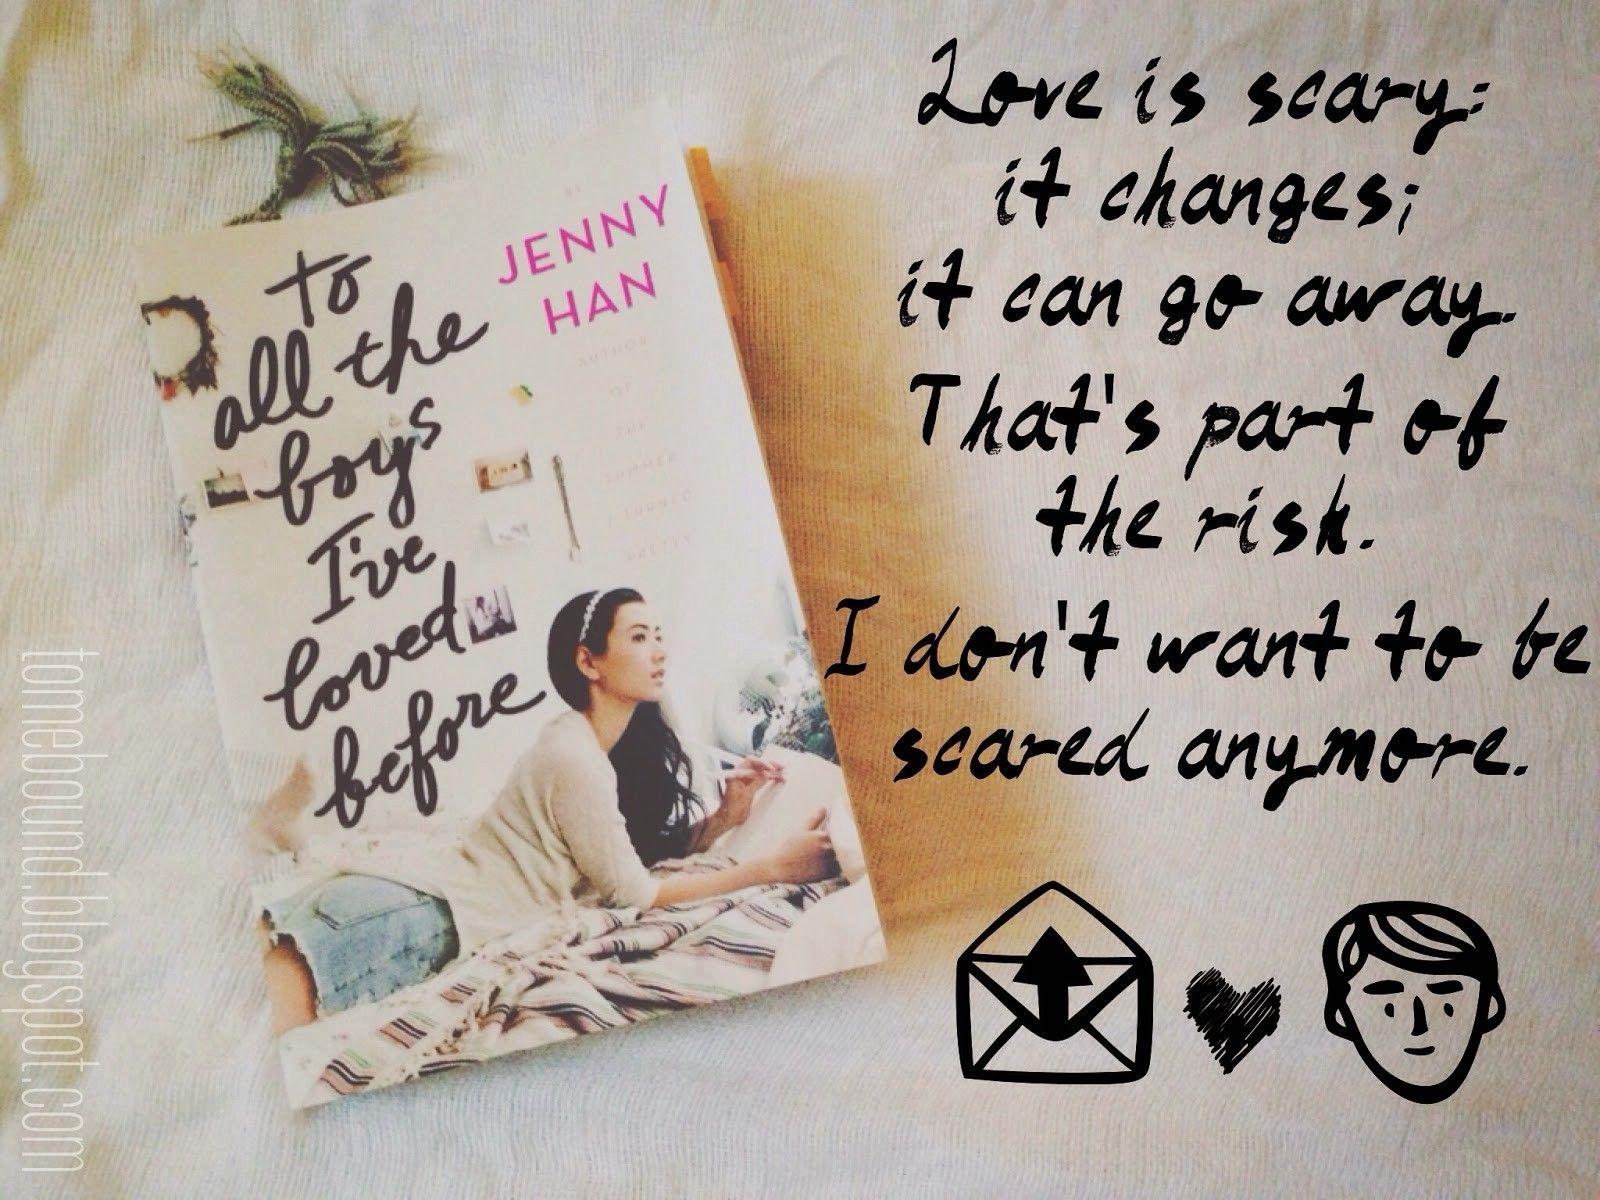 My Favorite Quotes from “To All the Boys I've Loved Before”